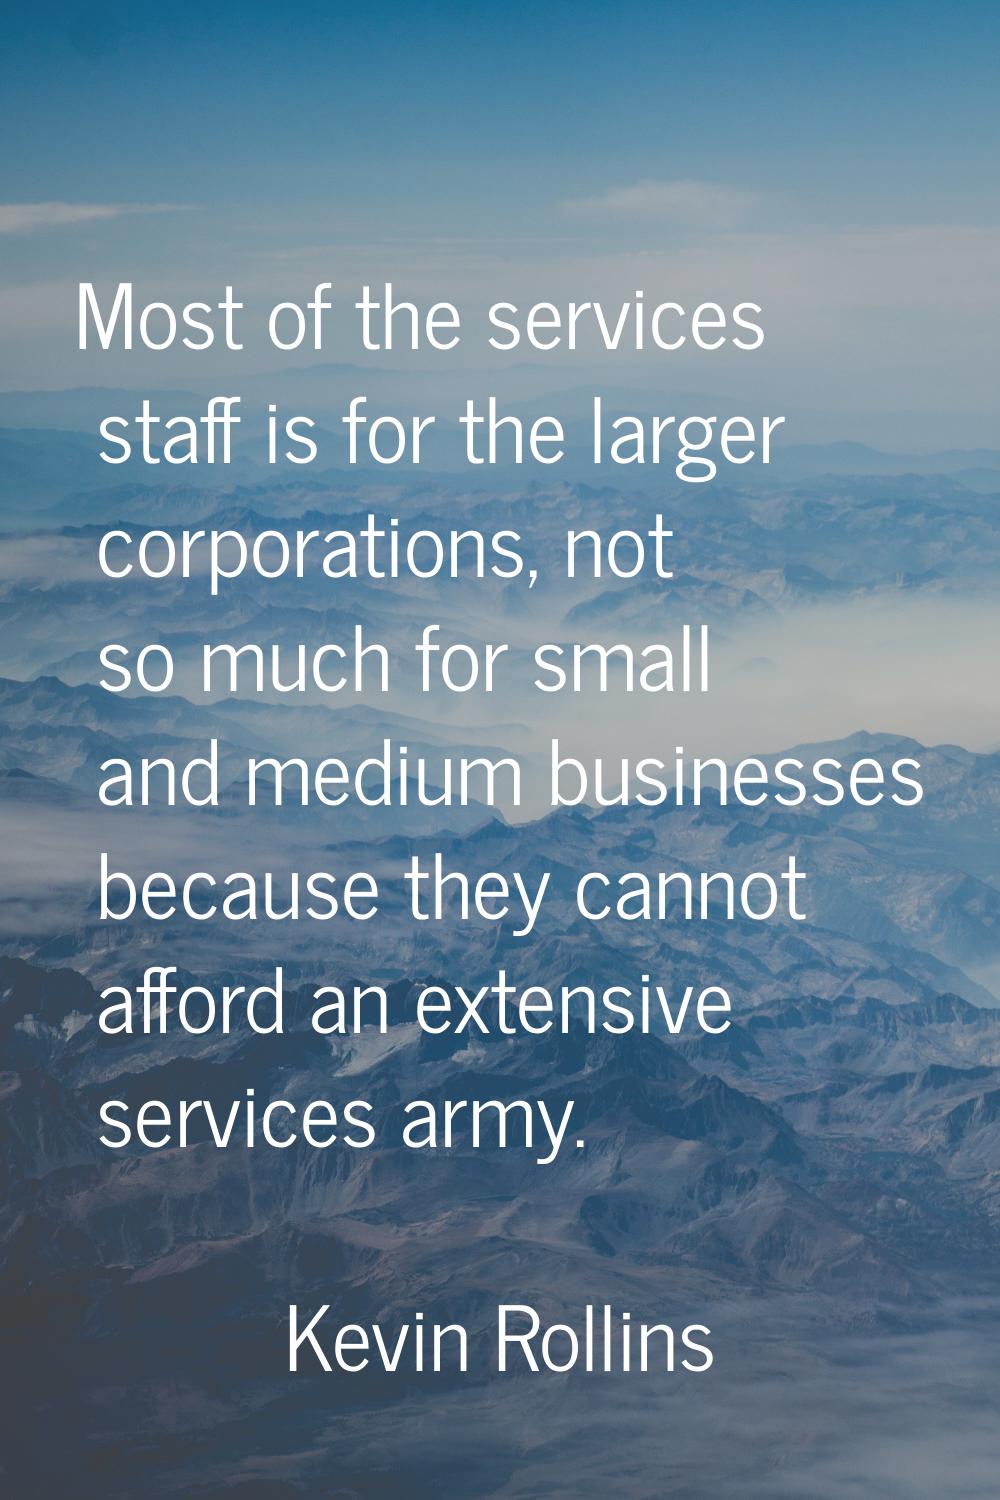 Most of the services staff is for the larger corporations, not so much for small and medium busines